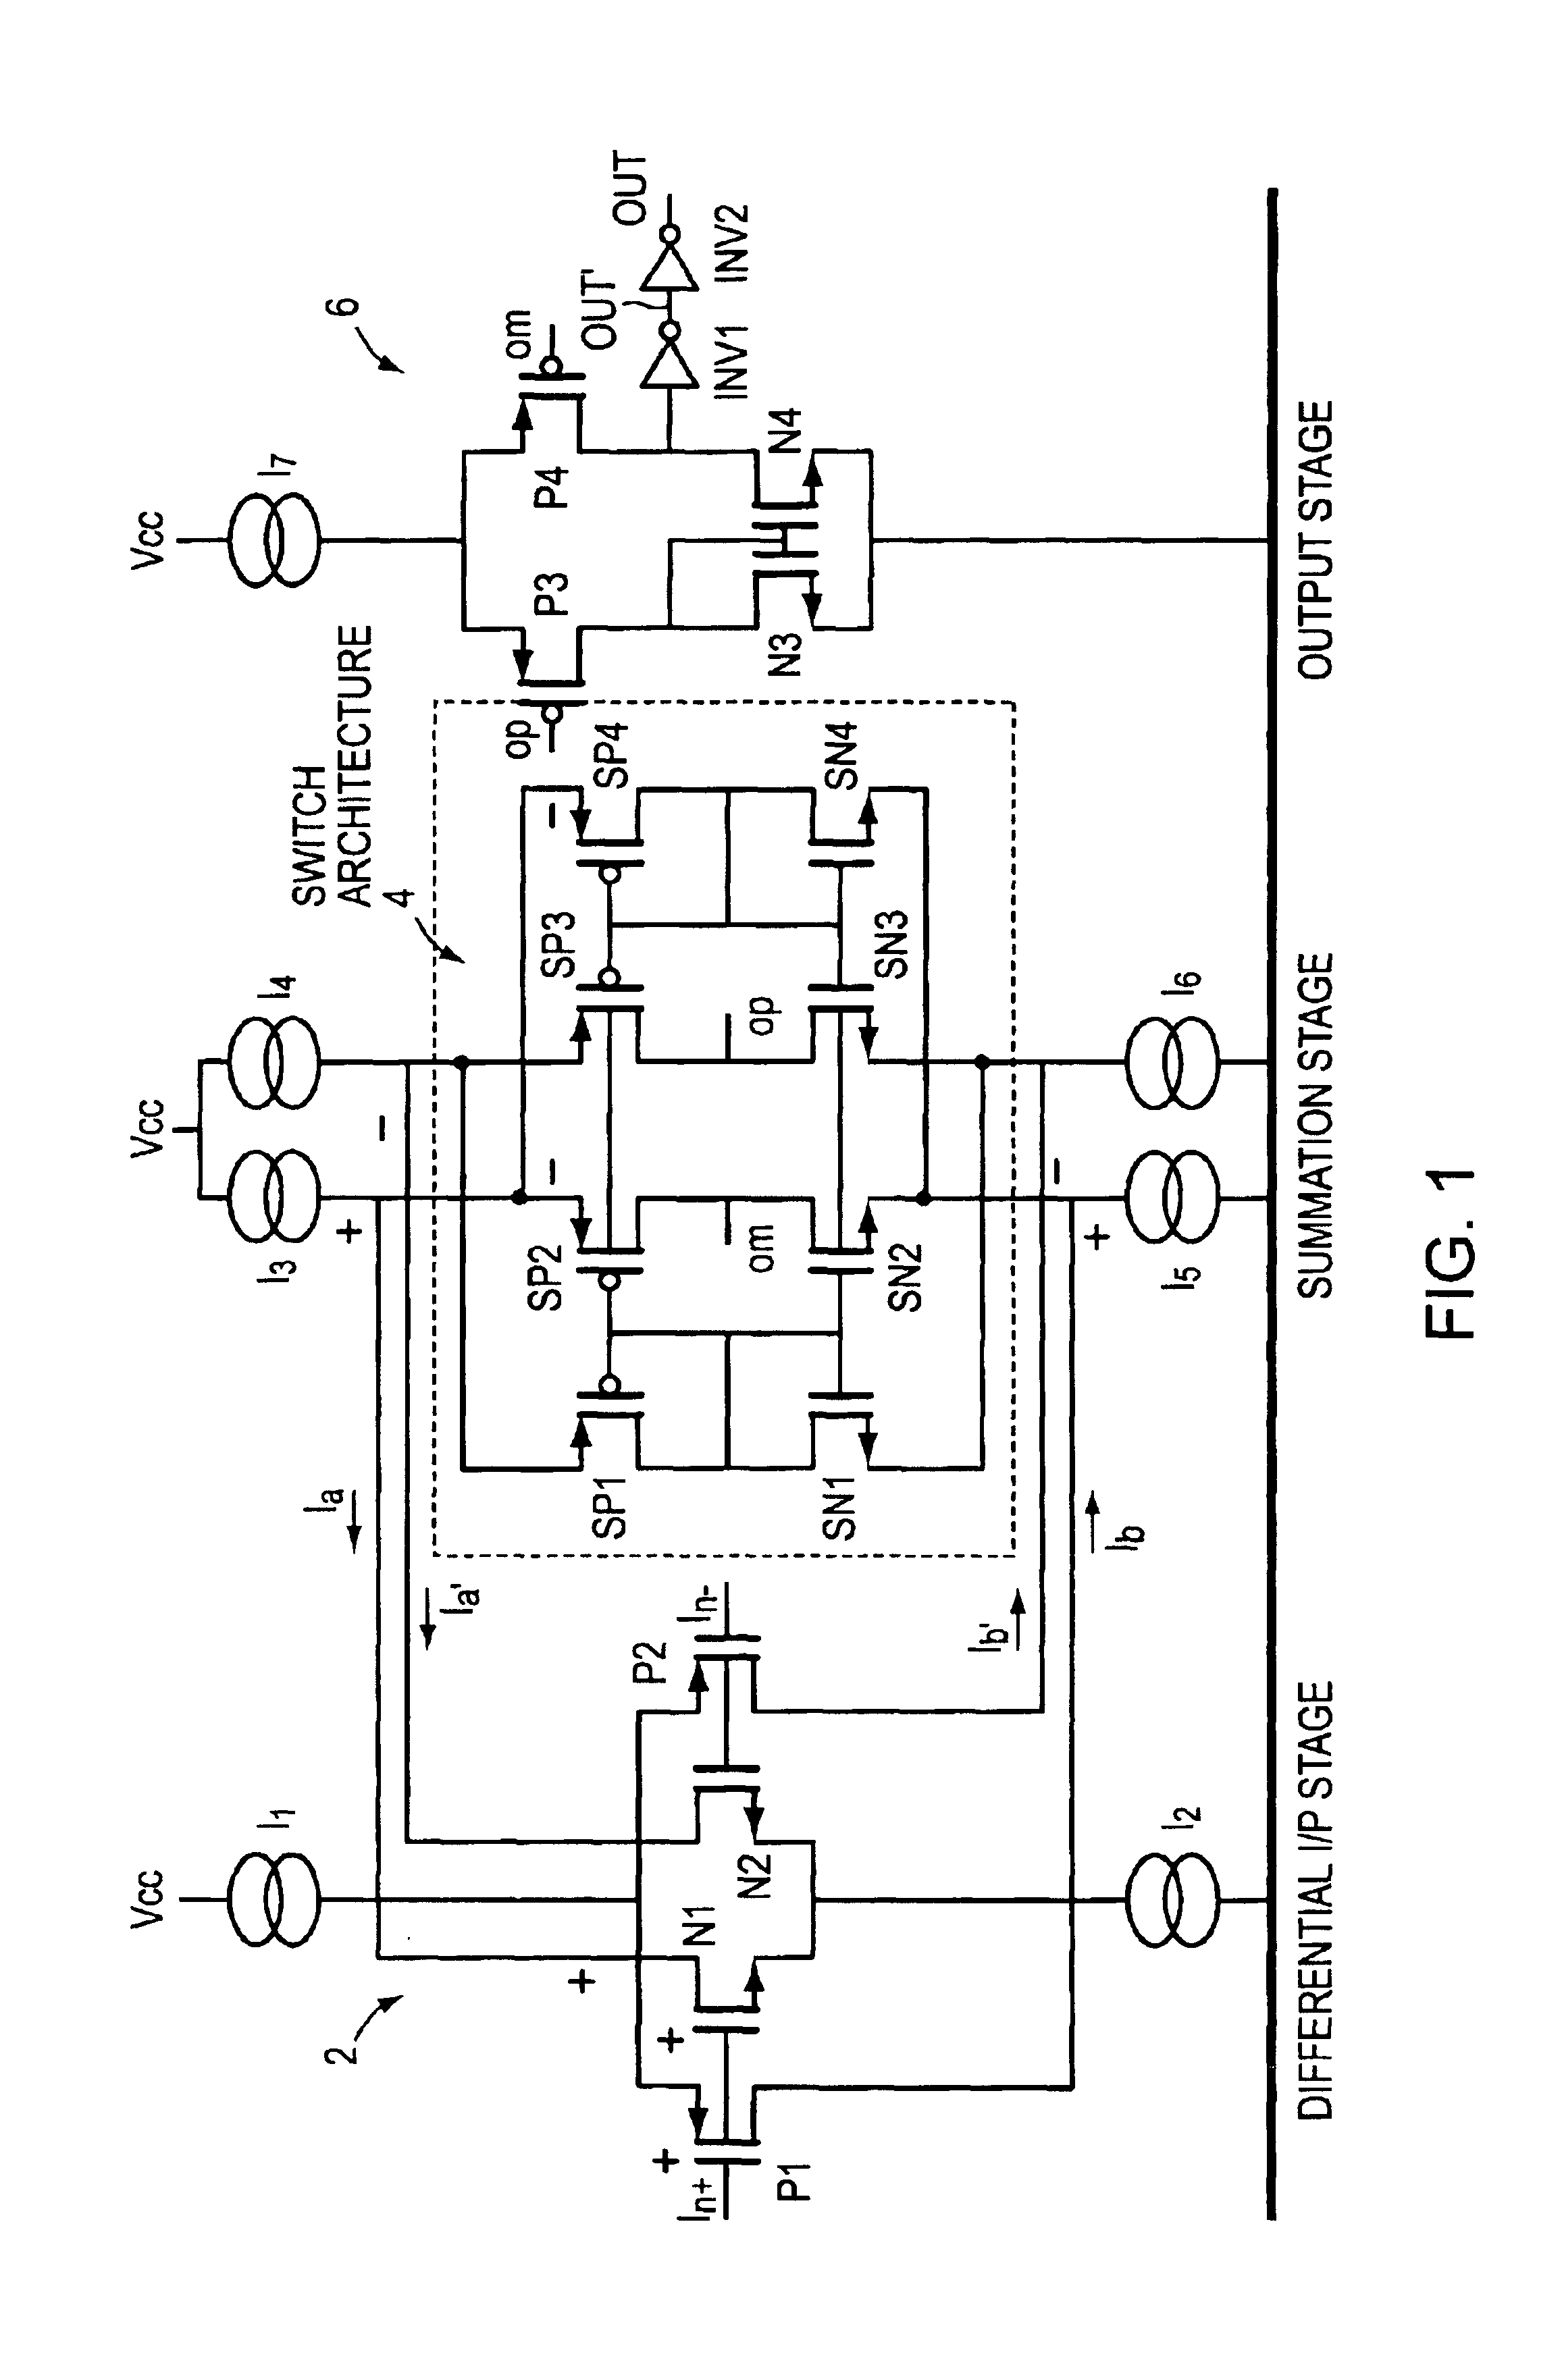 Low voltage, low power differential receiver